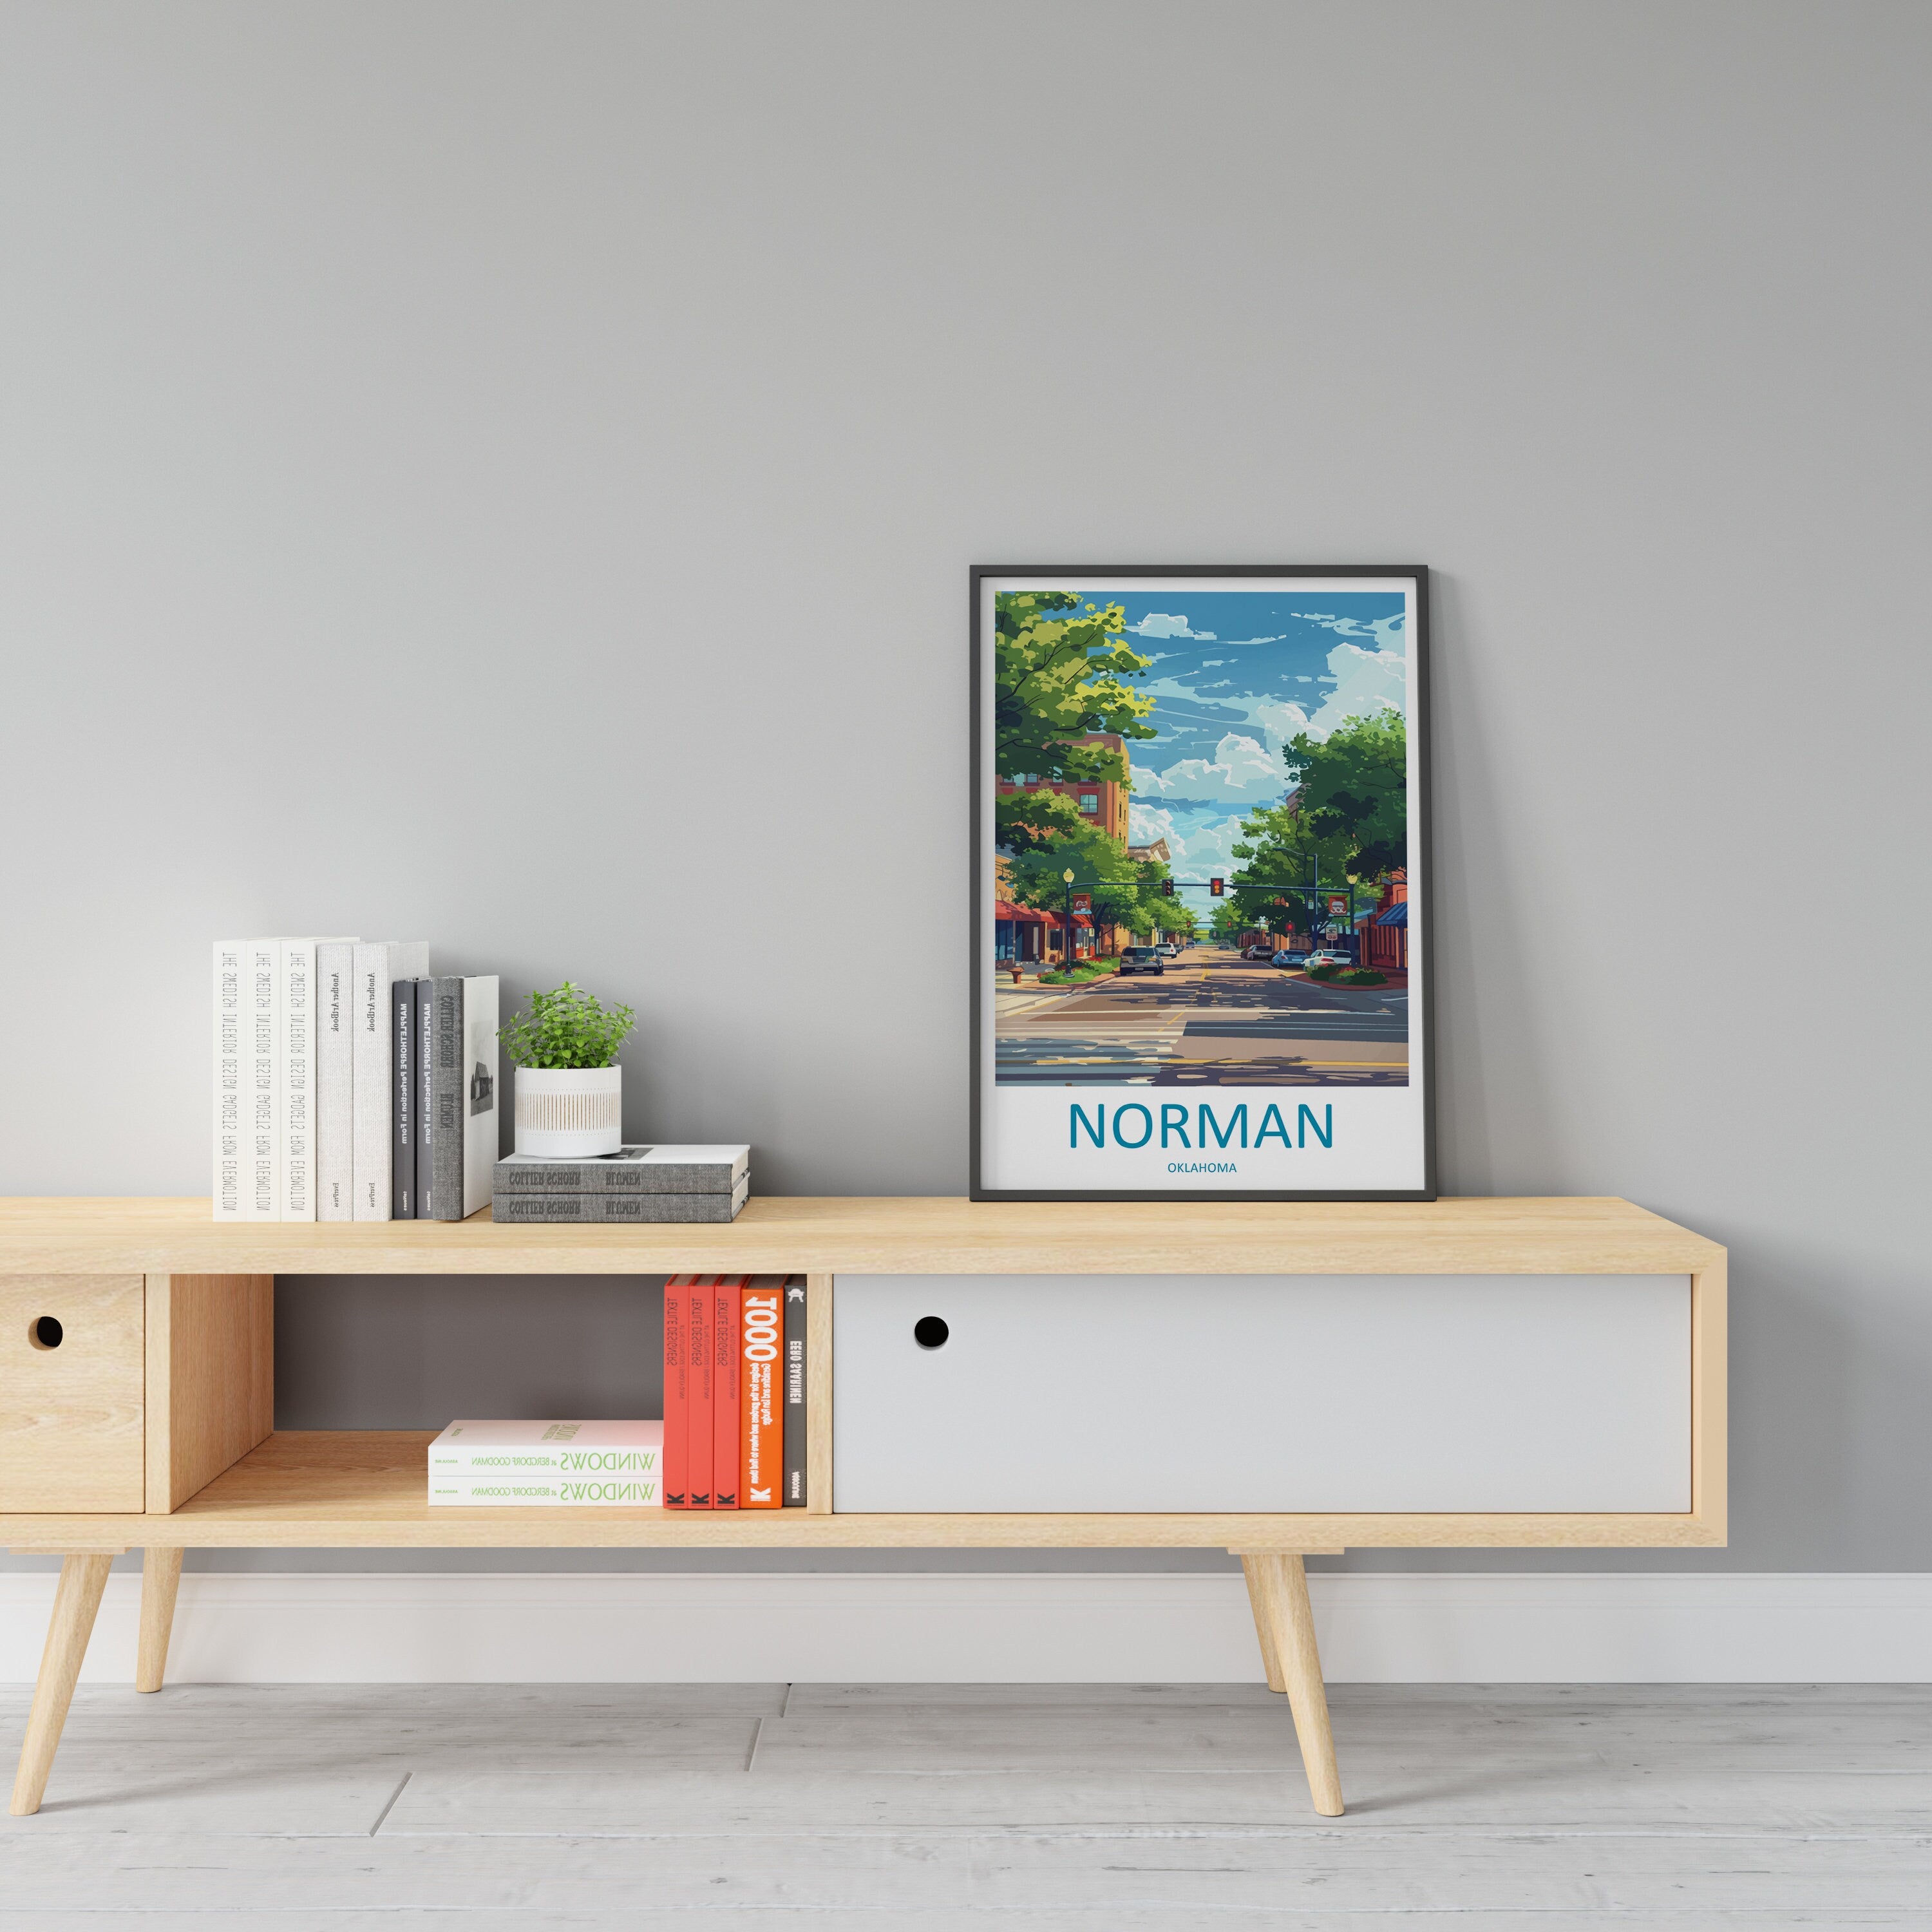 Norman Travel Print Wall Art Norman Wall Hanging Home Décor Norman Gift Art Lovers Oklahoma Art Lover Gift Norman Oklahoma Art